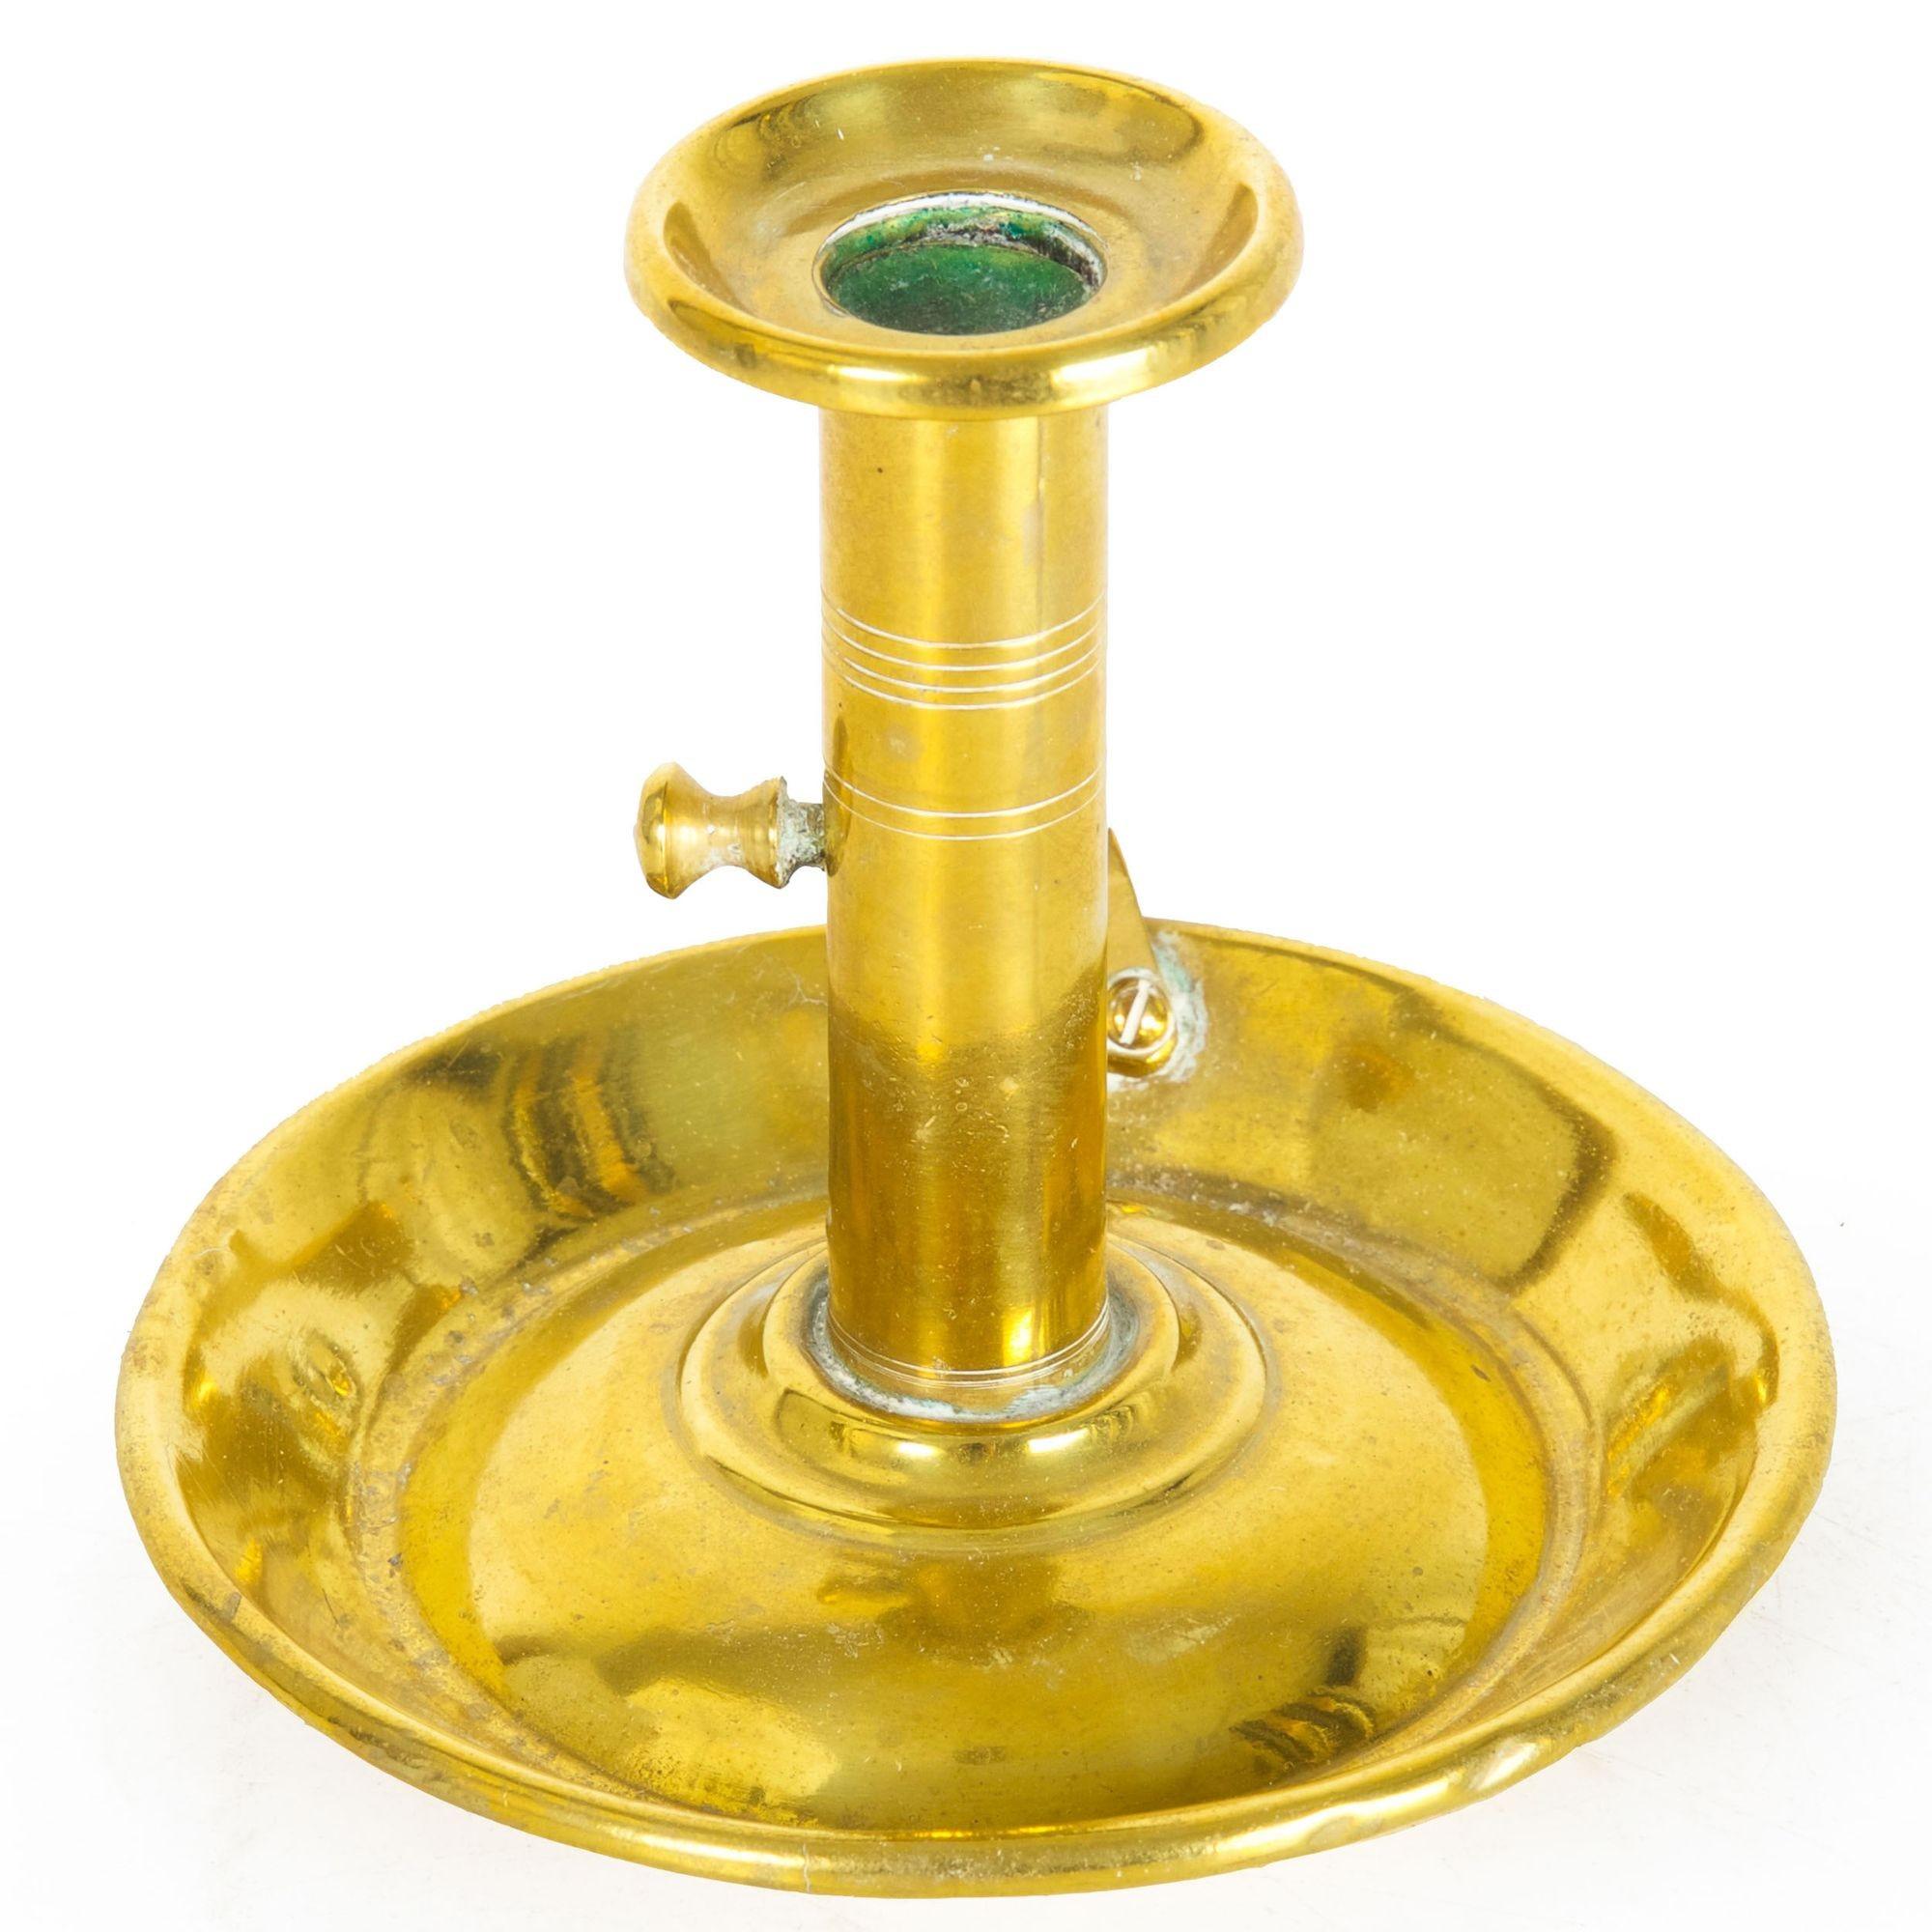 English Antique Georgian Brass Candlestick Chamberstick, 19th Century
Item #  104OCJ23L-4

A good early 19th century brass chamberstick, the baluster is beautifully turned with incised ring decorations around the stem while a single knob in the